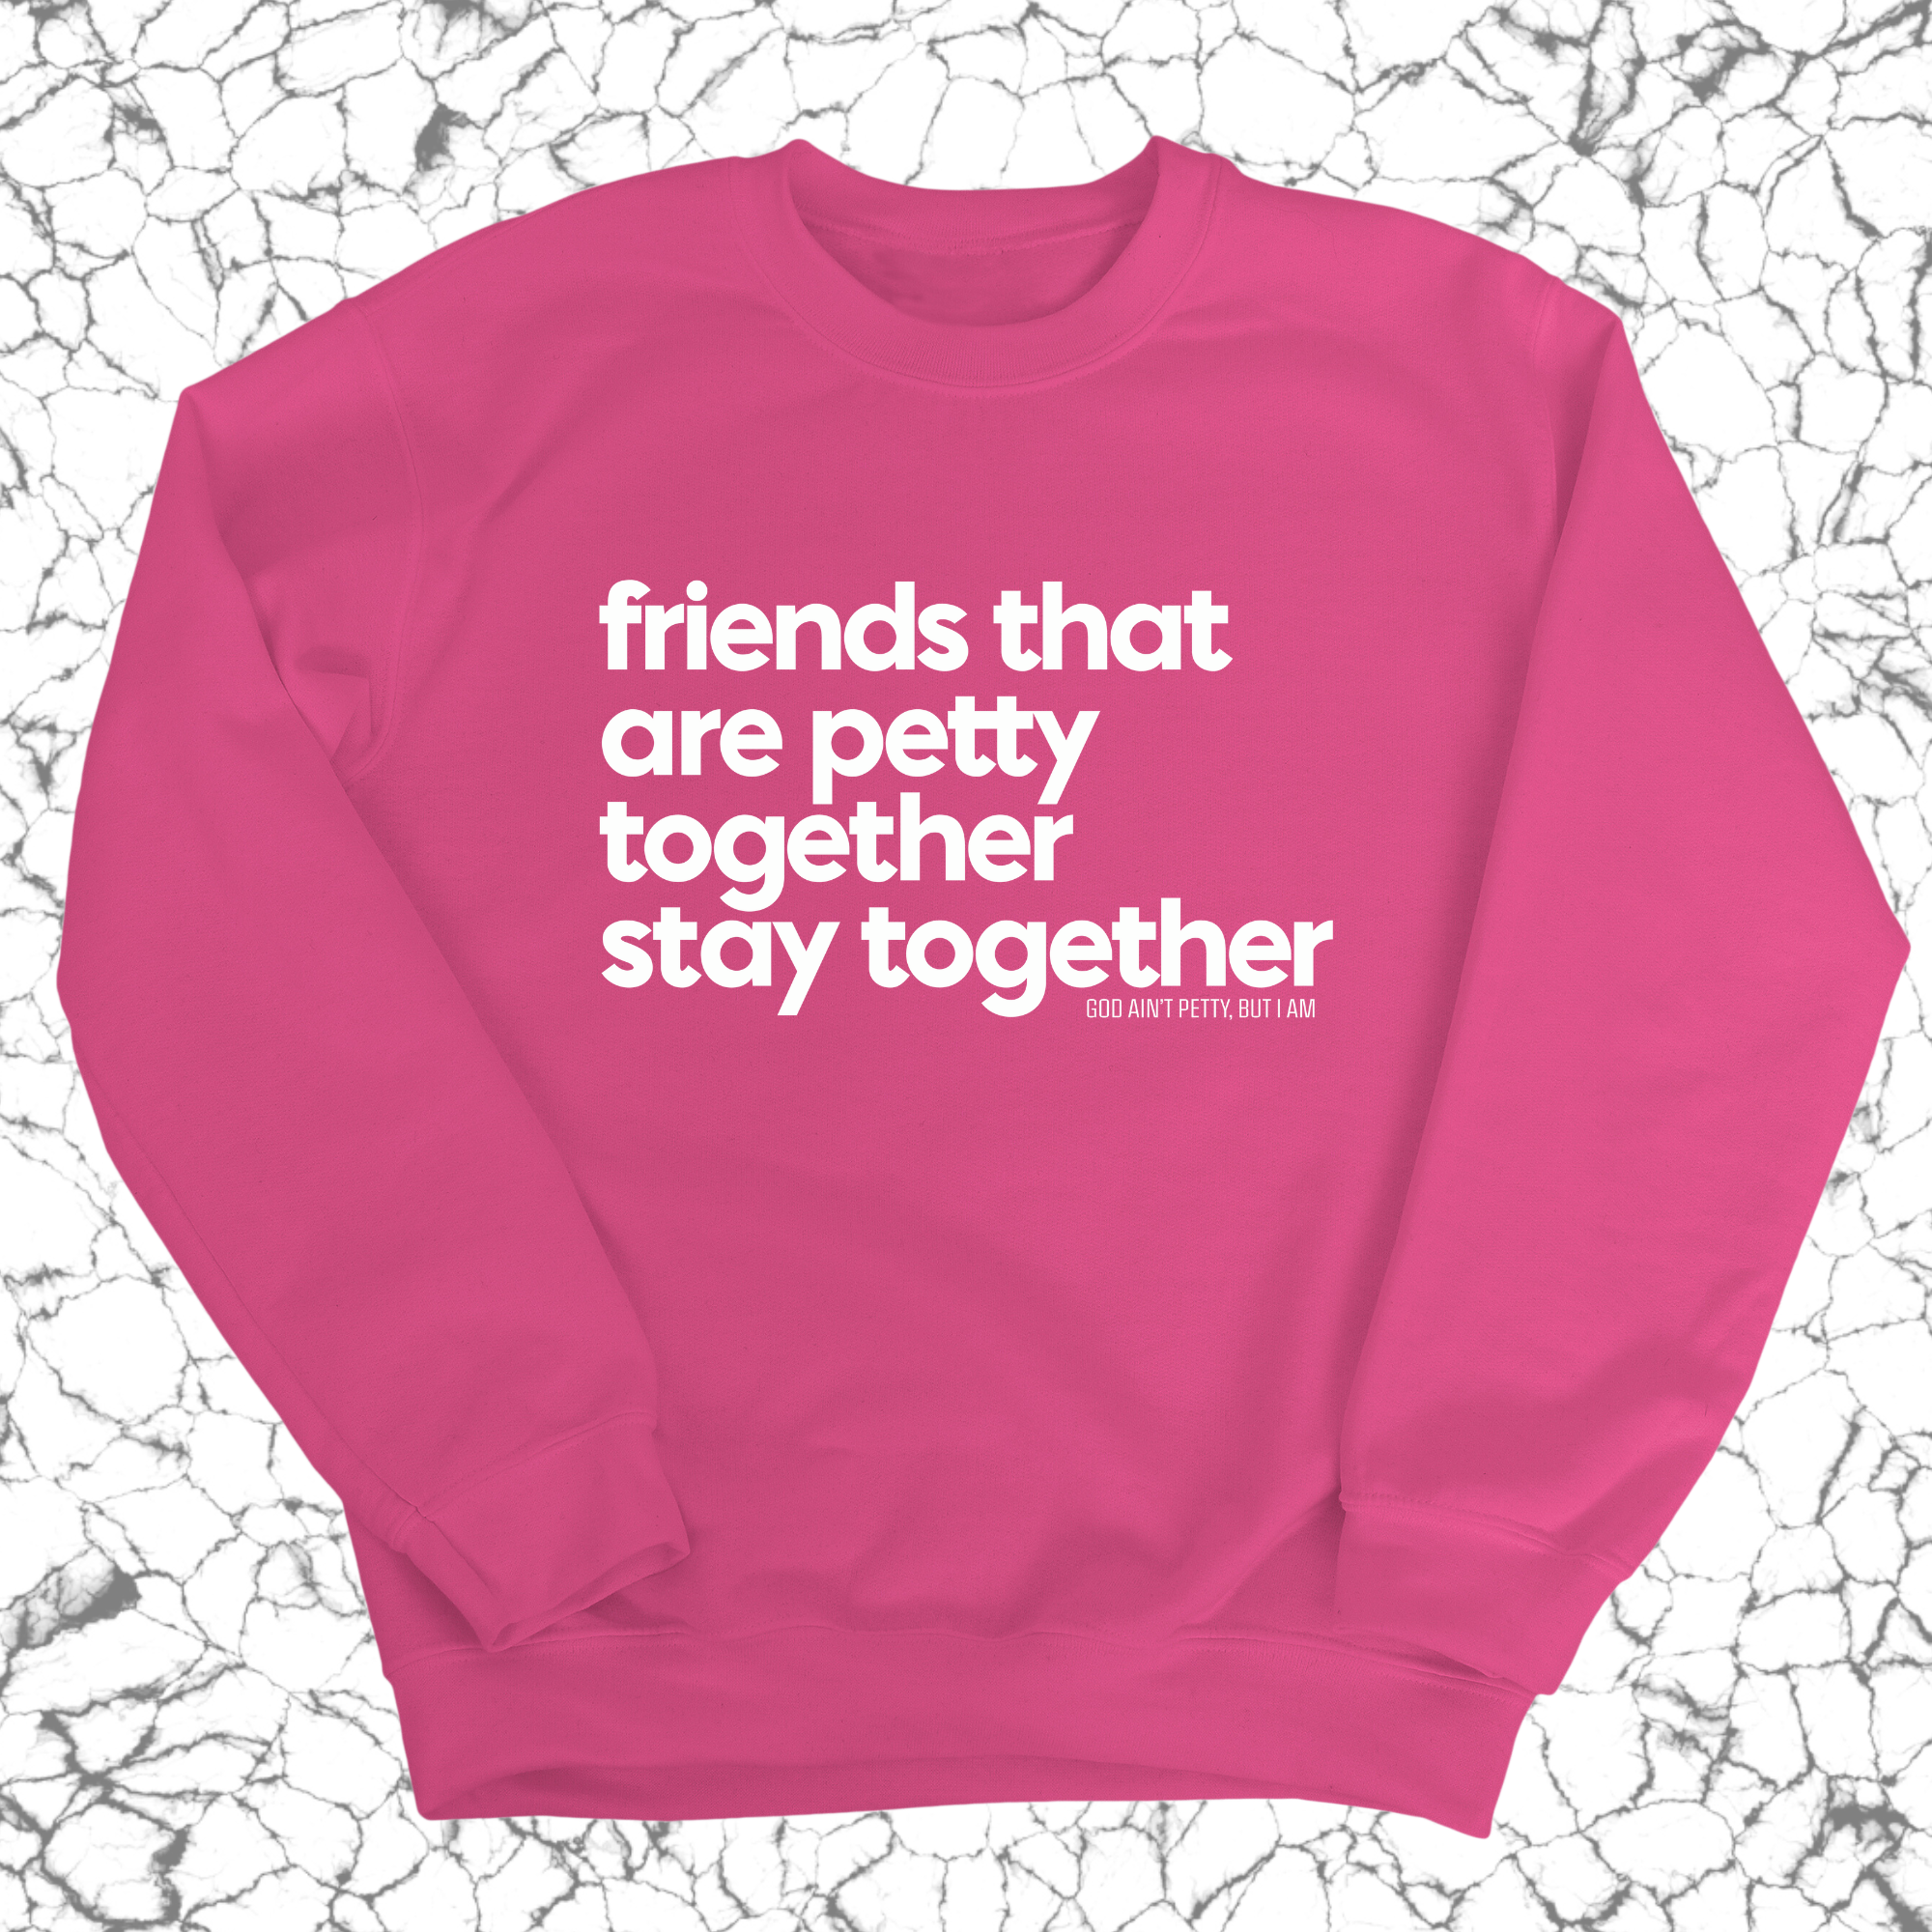 Friends that are petty together stay together Unisex Sweatshirt-Sweatshirt-The Original God Ain't Petty But I Am